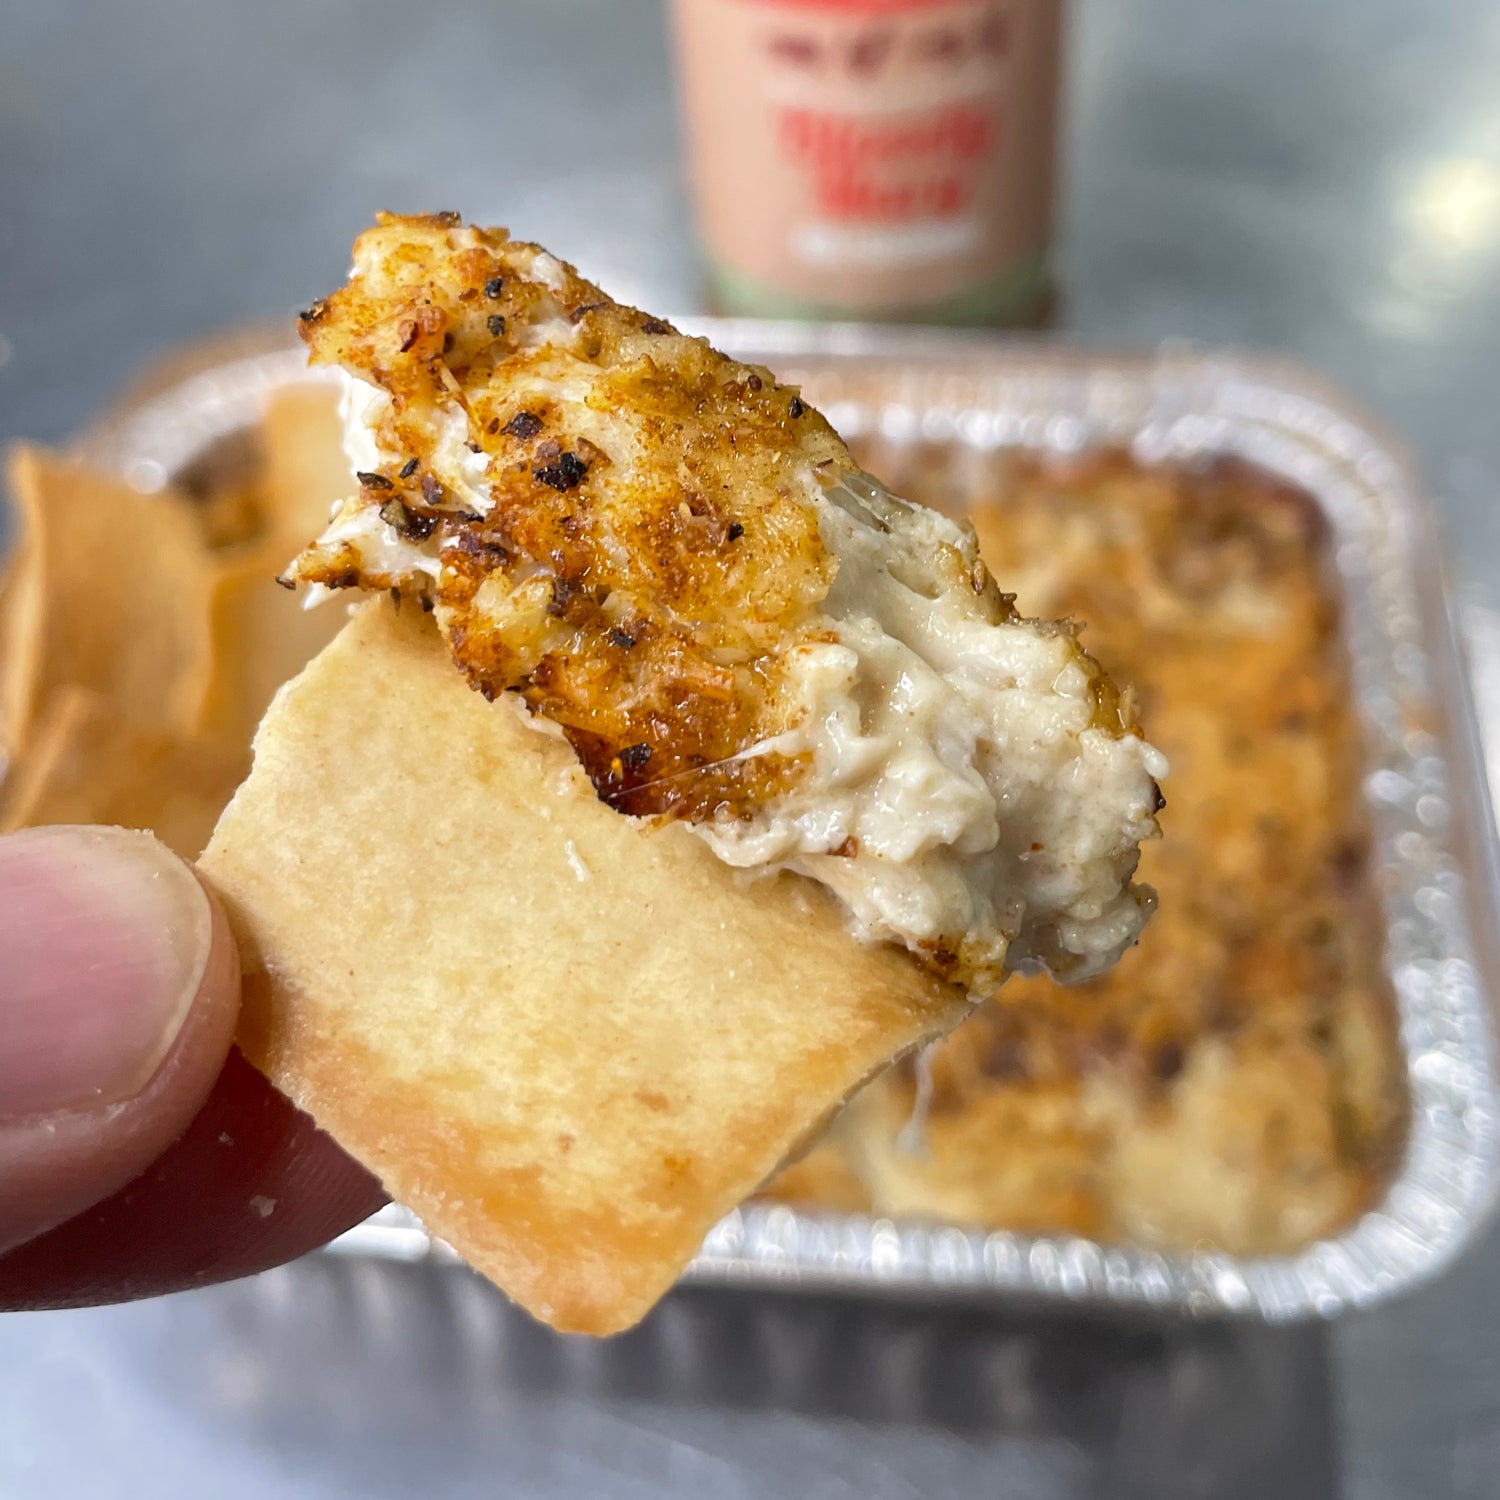 Crab dip on a chip ready to enjoy